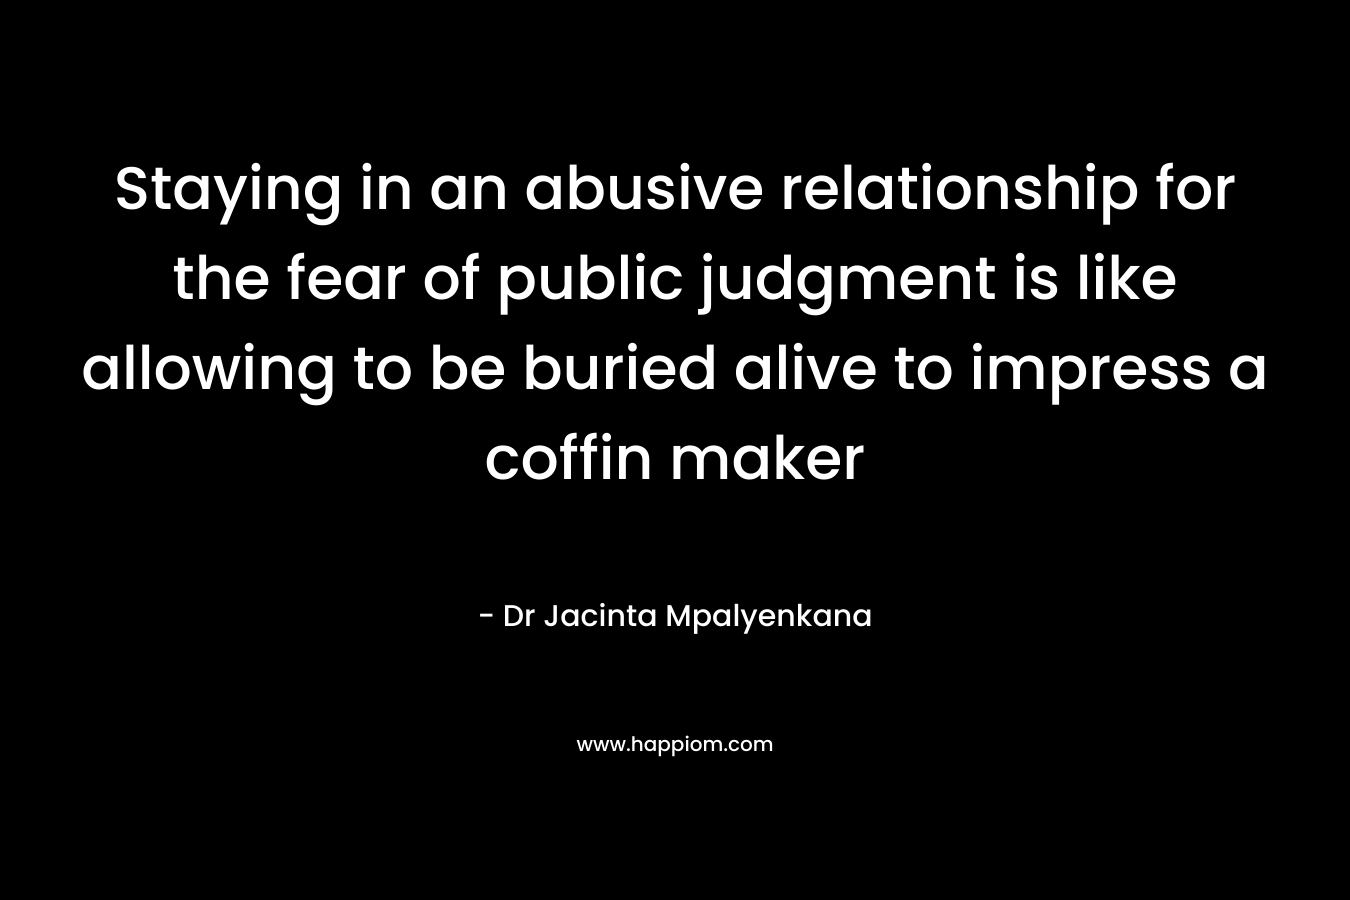 Staying in an abusive relationship for the fear of public judgment is like allowing to be buried alive to impress a coffin maker